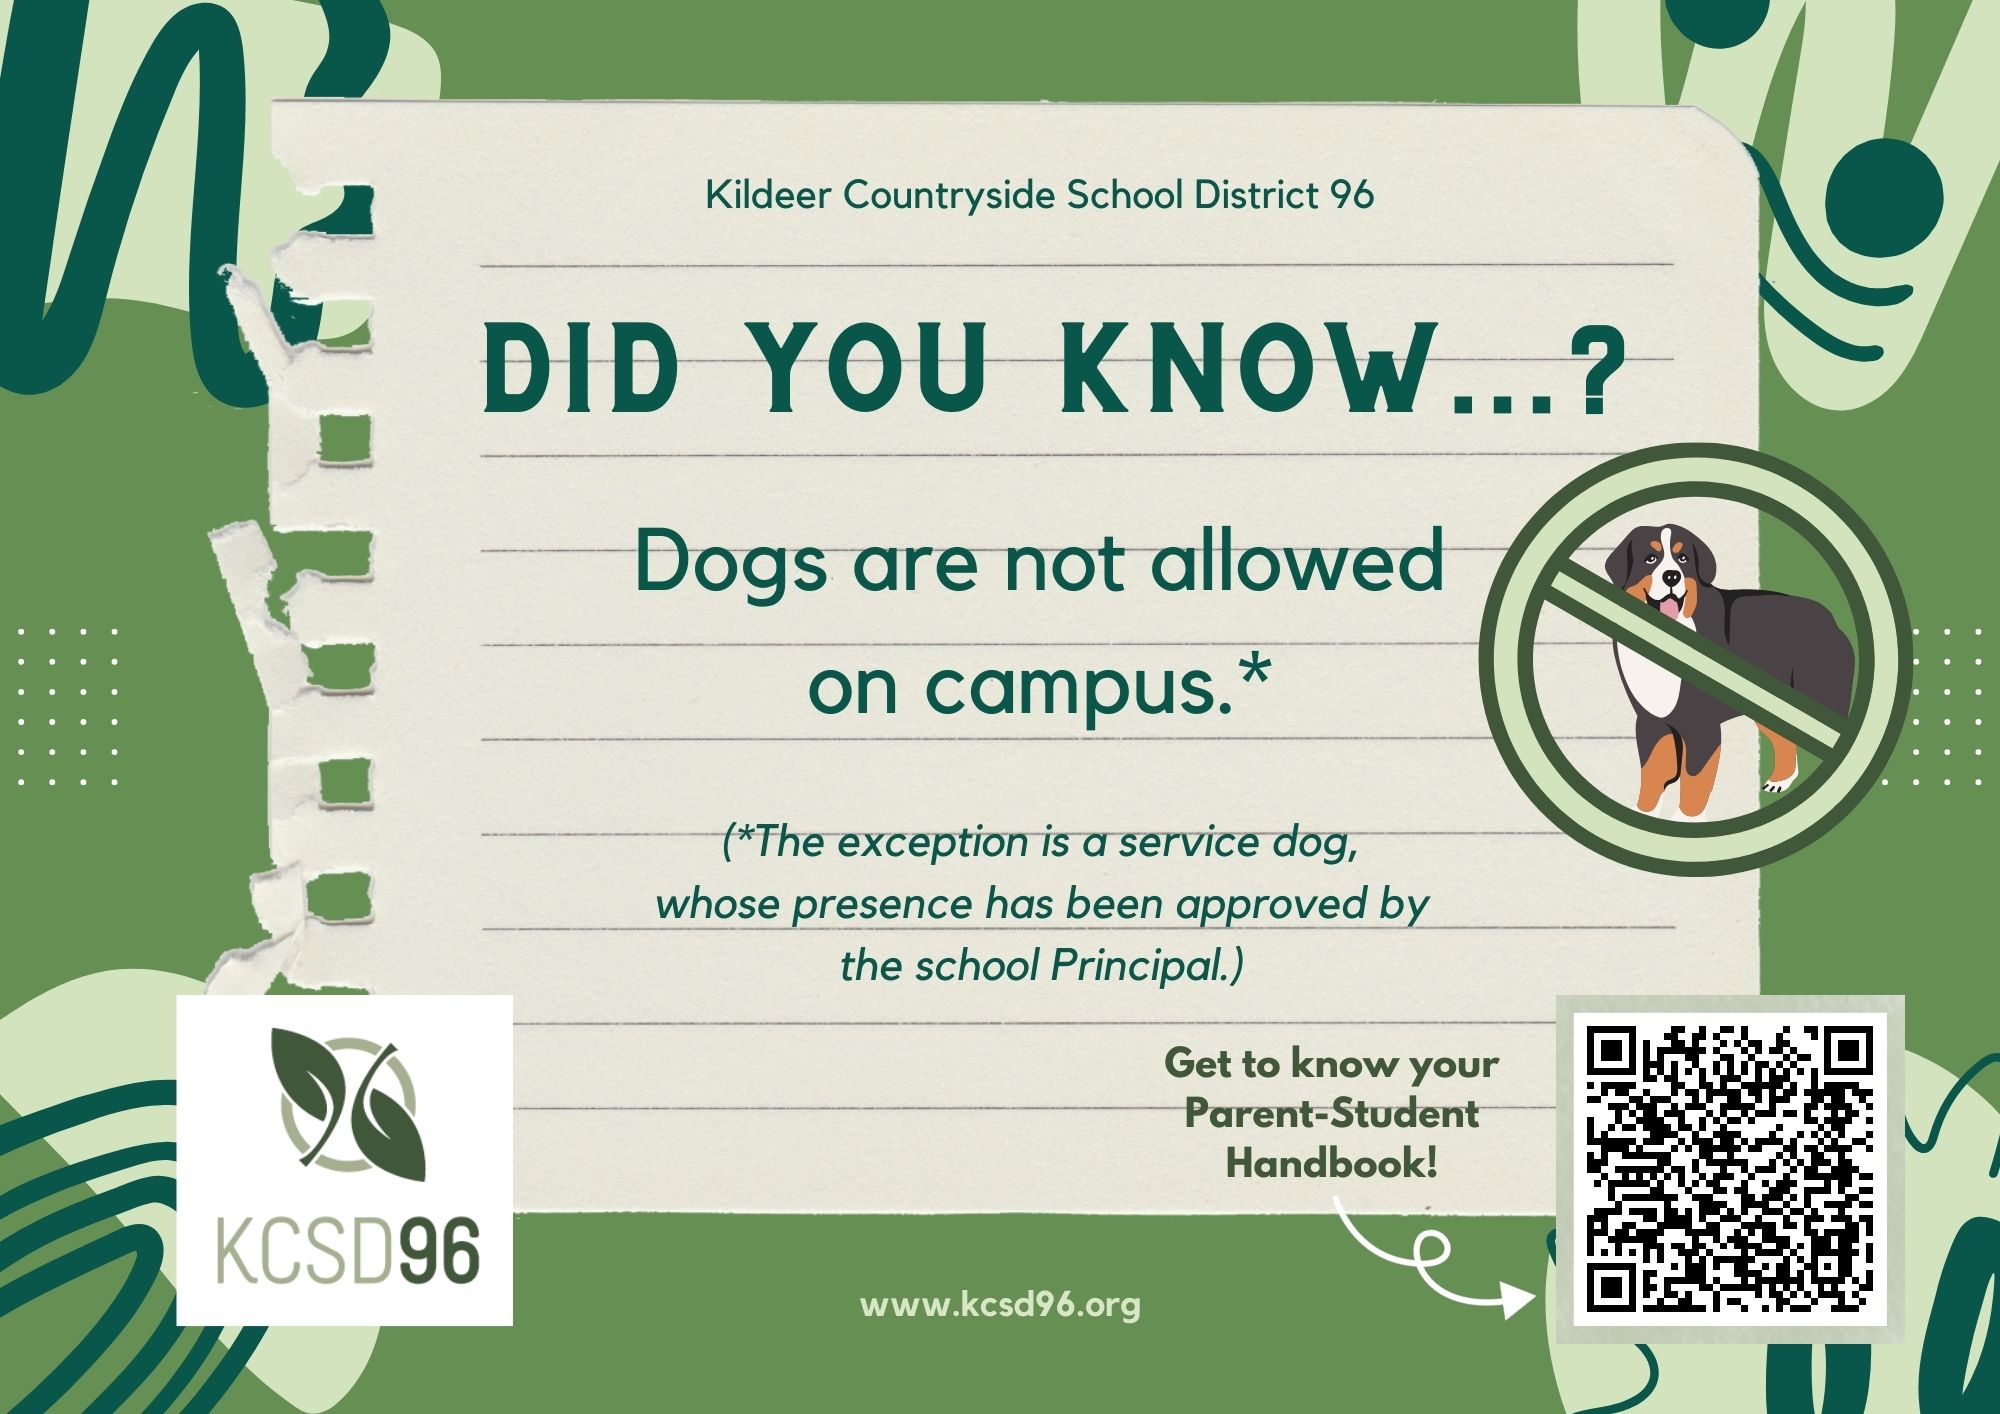 Did You Know? No Dogs on Campus ~ Parent-Student Handbook